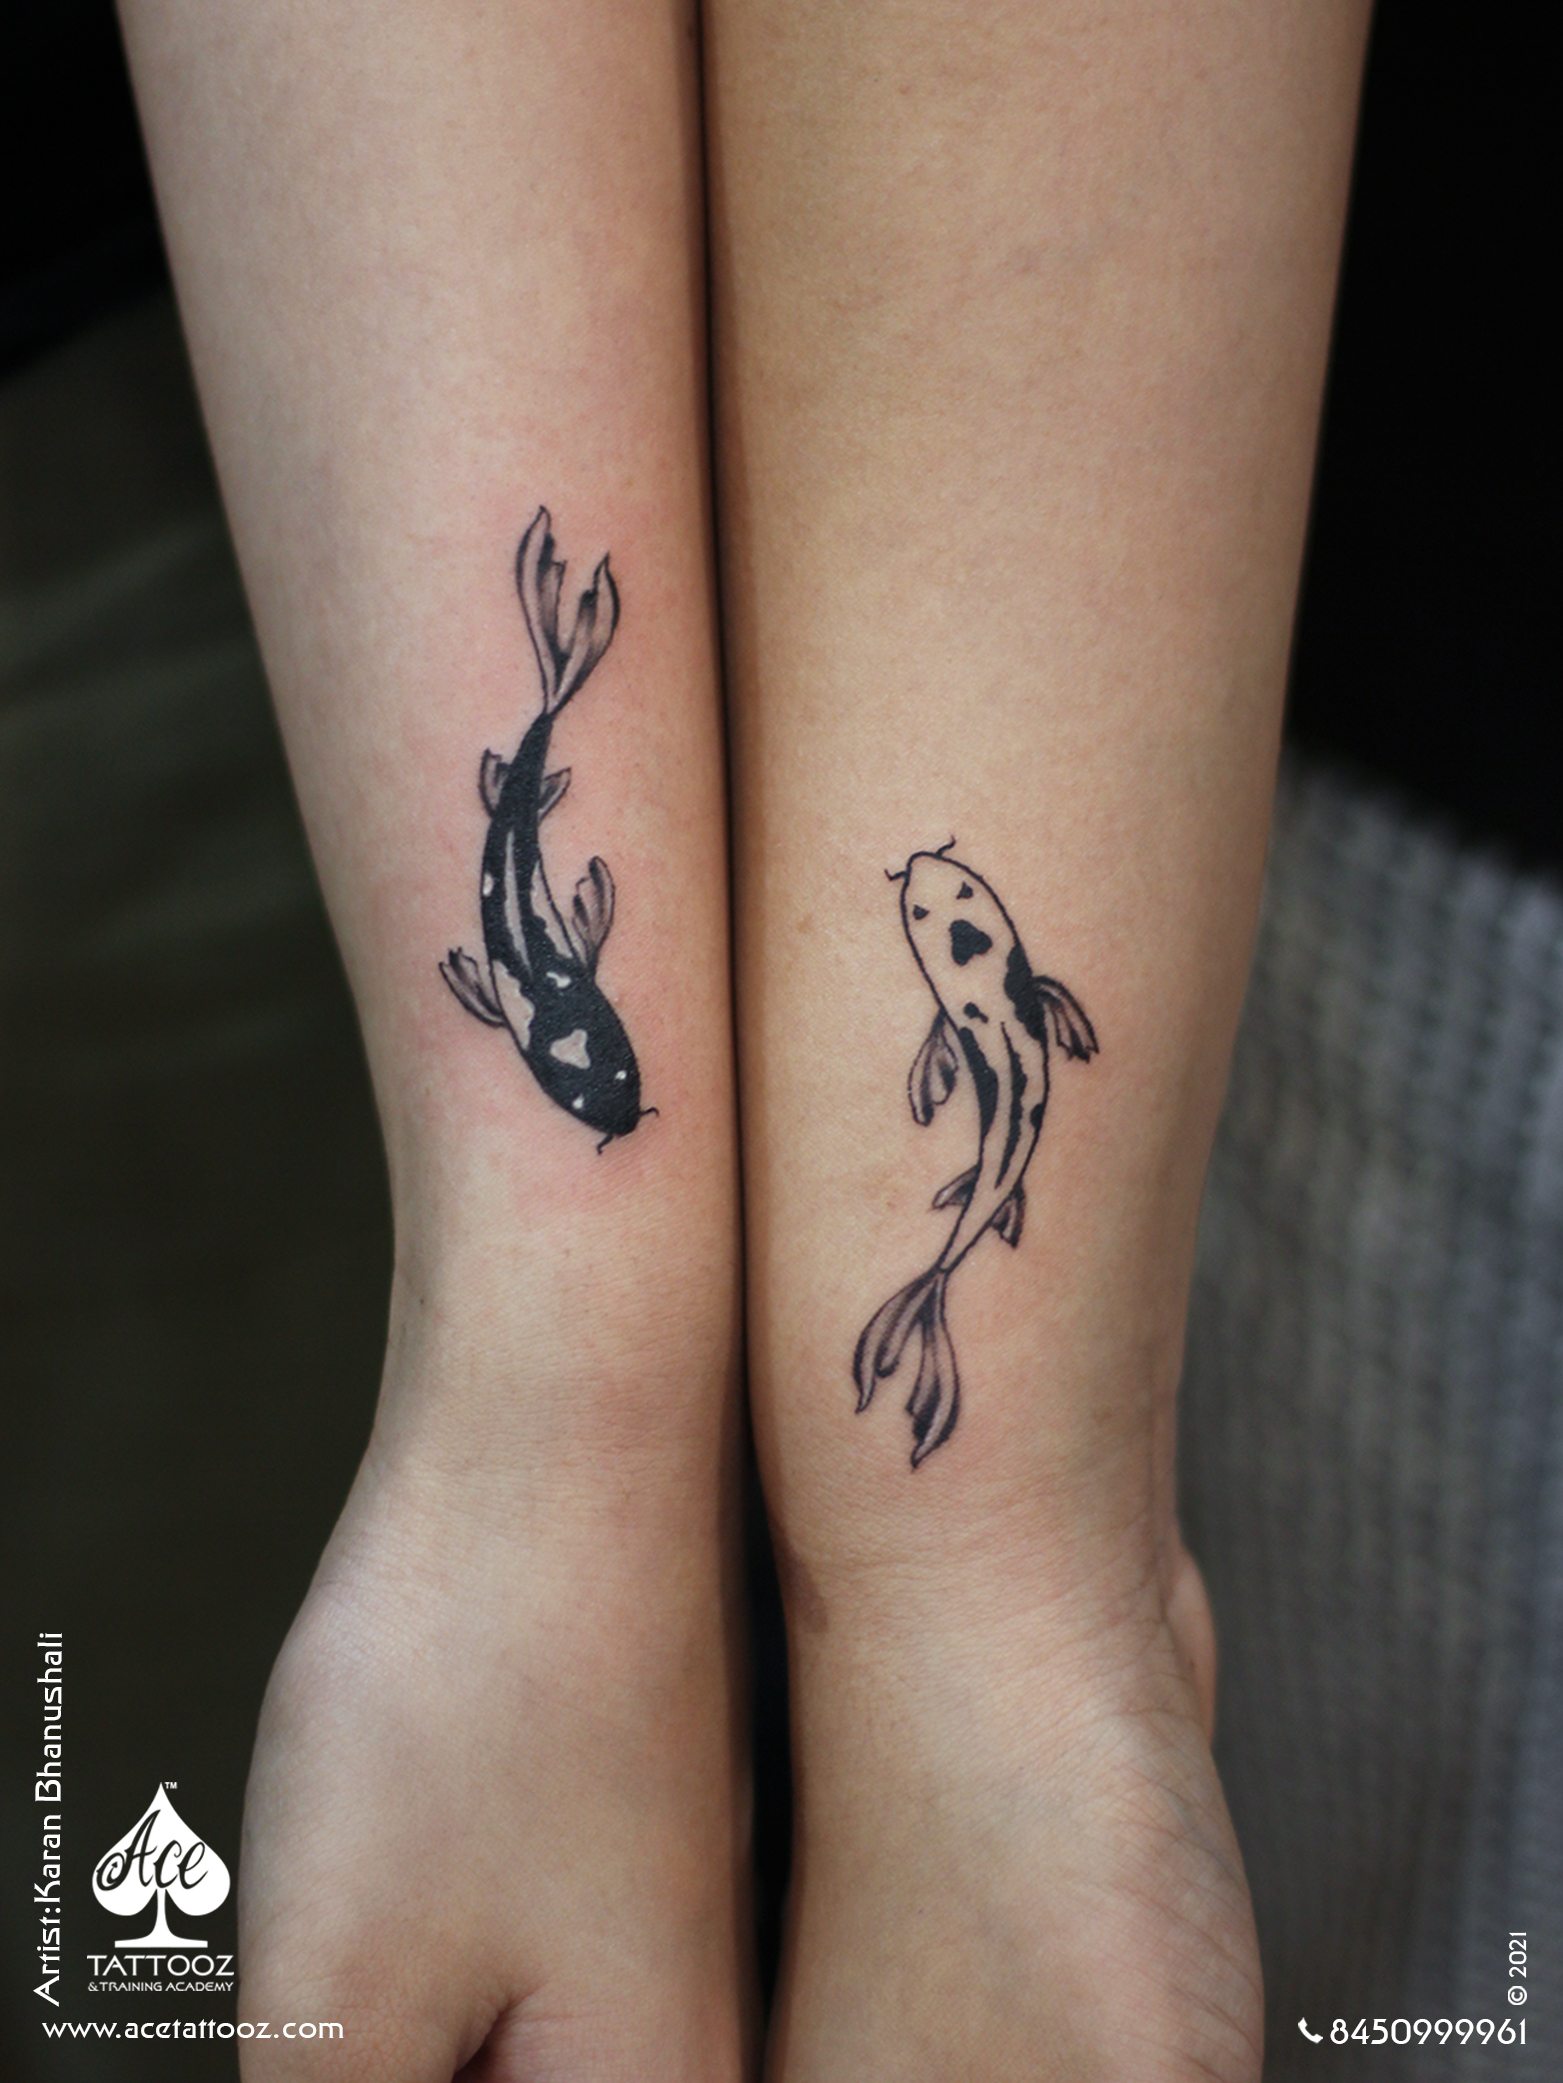 The Koi Fish tattoo on chest by Per. - AI Generated Artwork - NightCafe  Creator